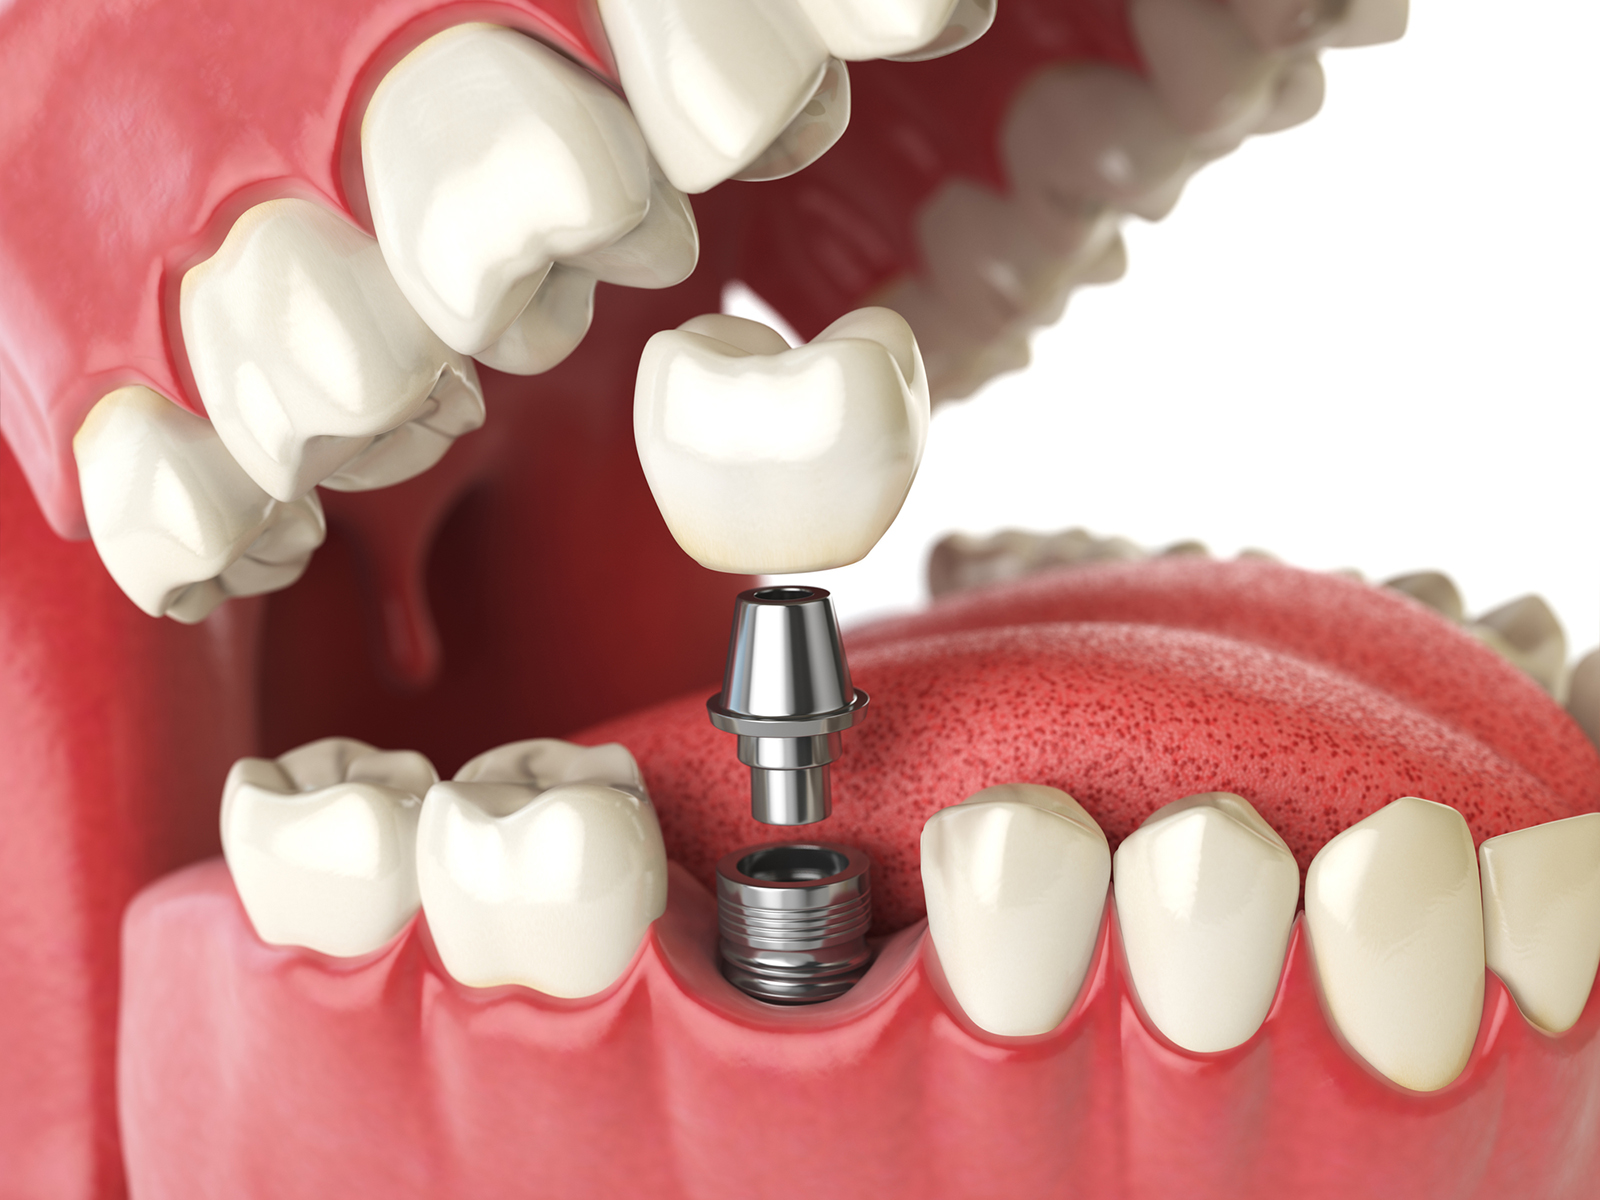 Difference between implant-supported crown and abutment crown?